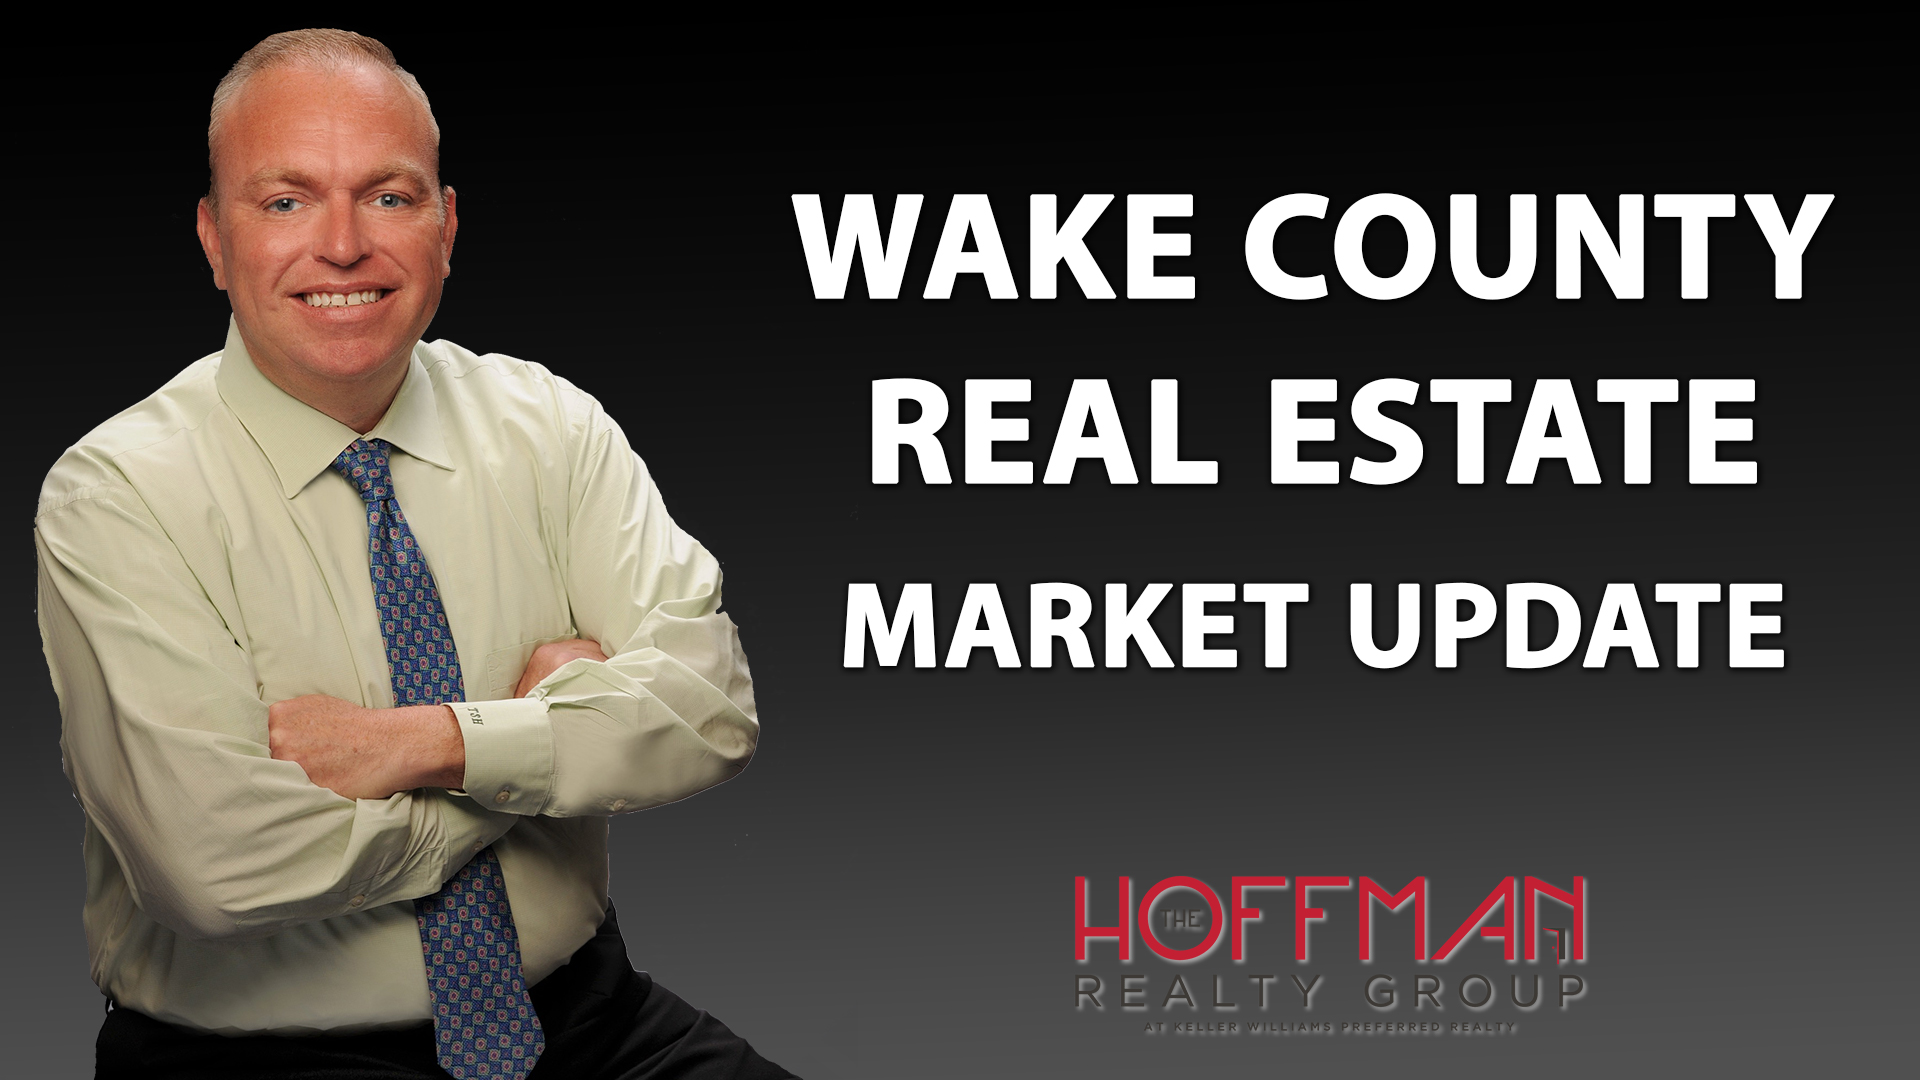 Q: What’s Going on in Wake County Real Estate?